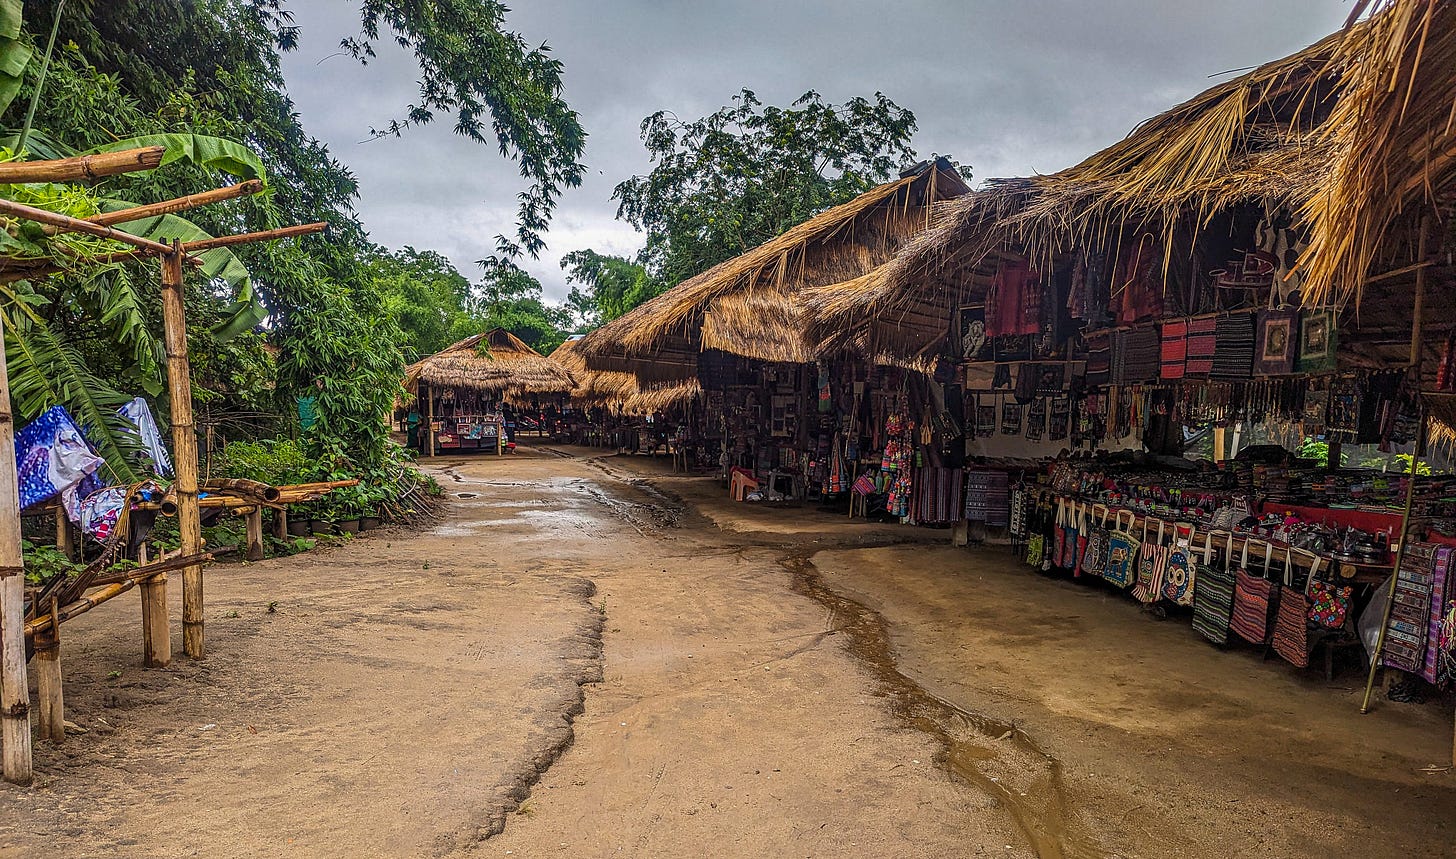 Thatch-roofed stalls filled with hand woven bags and clothing overlooking a muddy dirt path. 